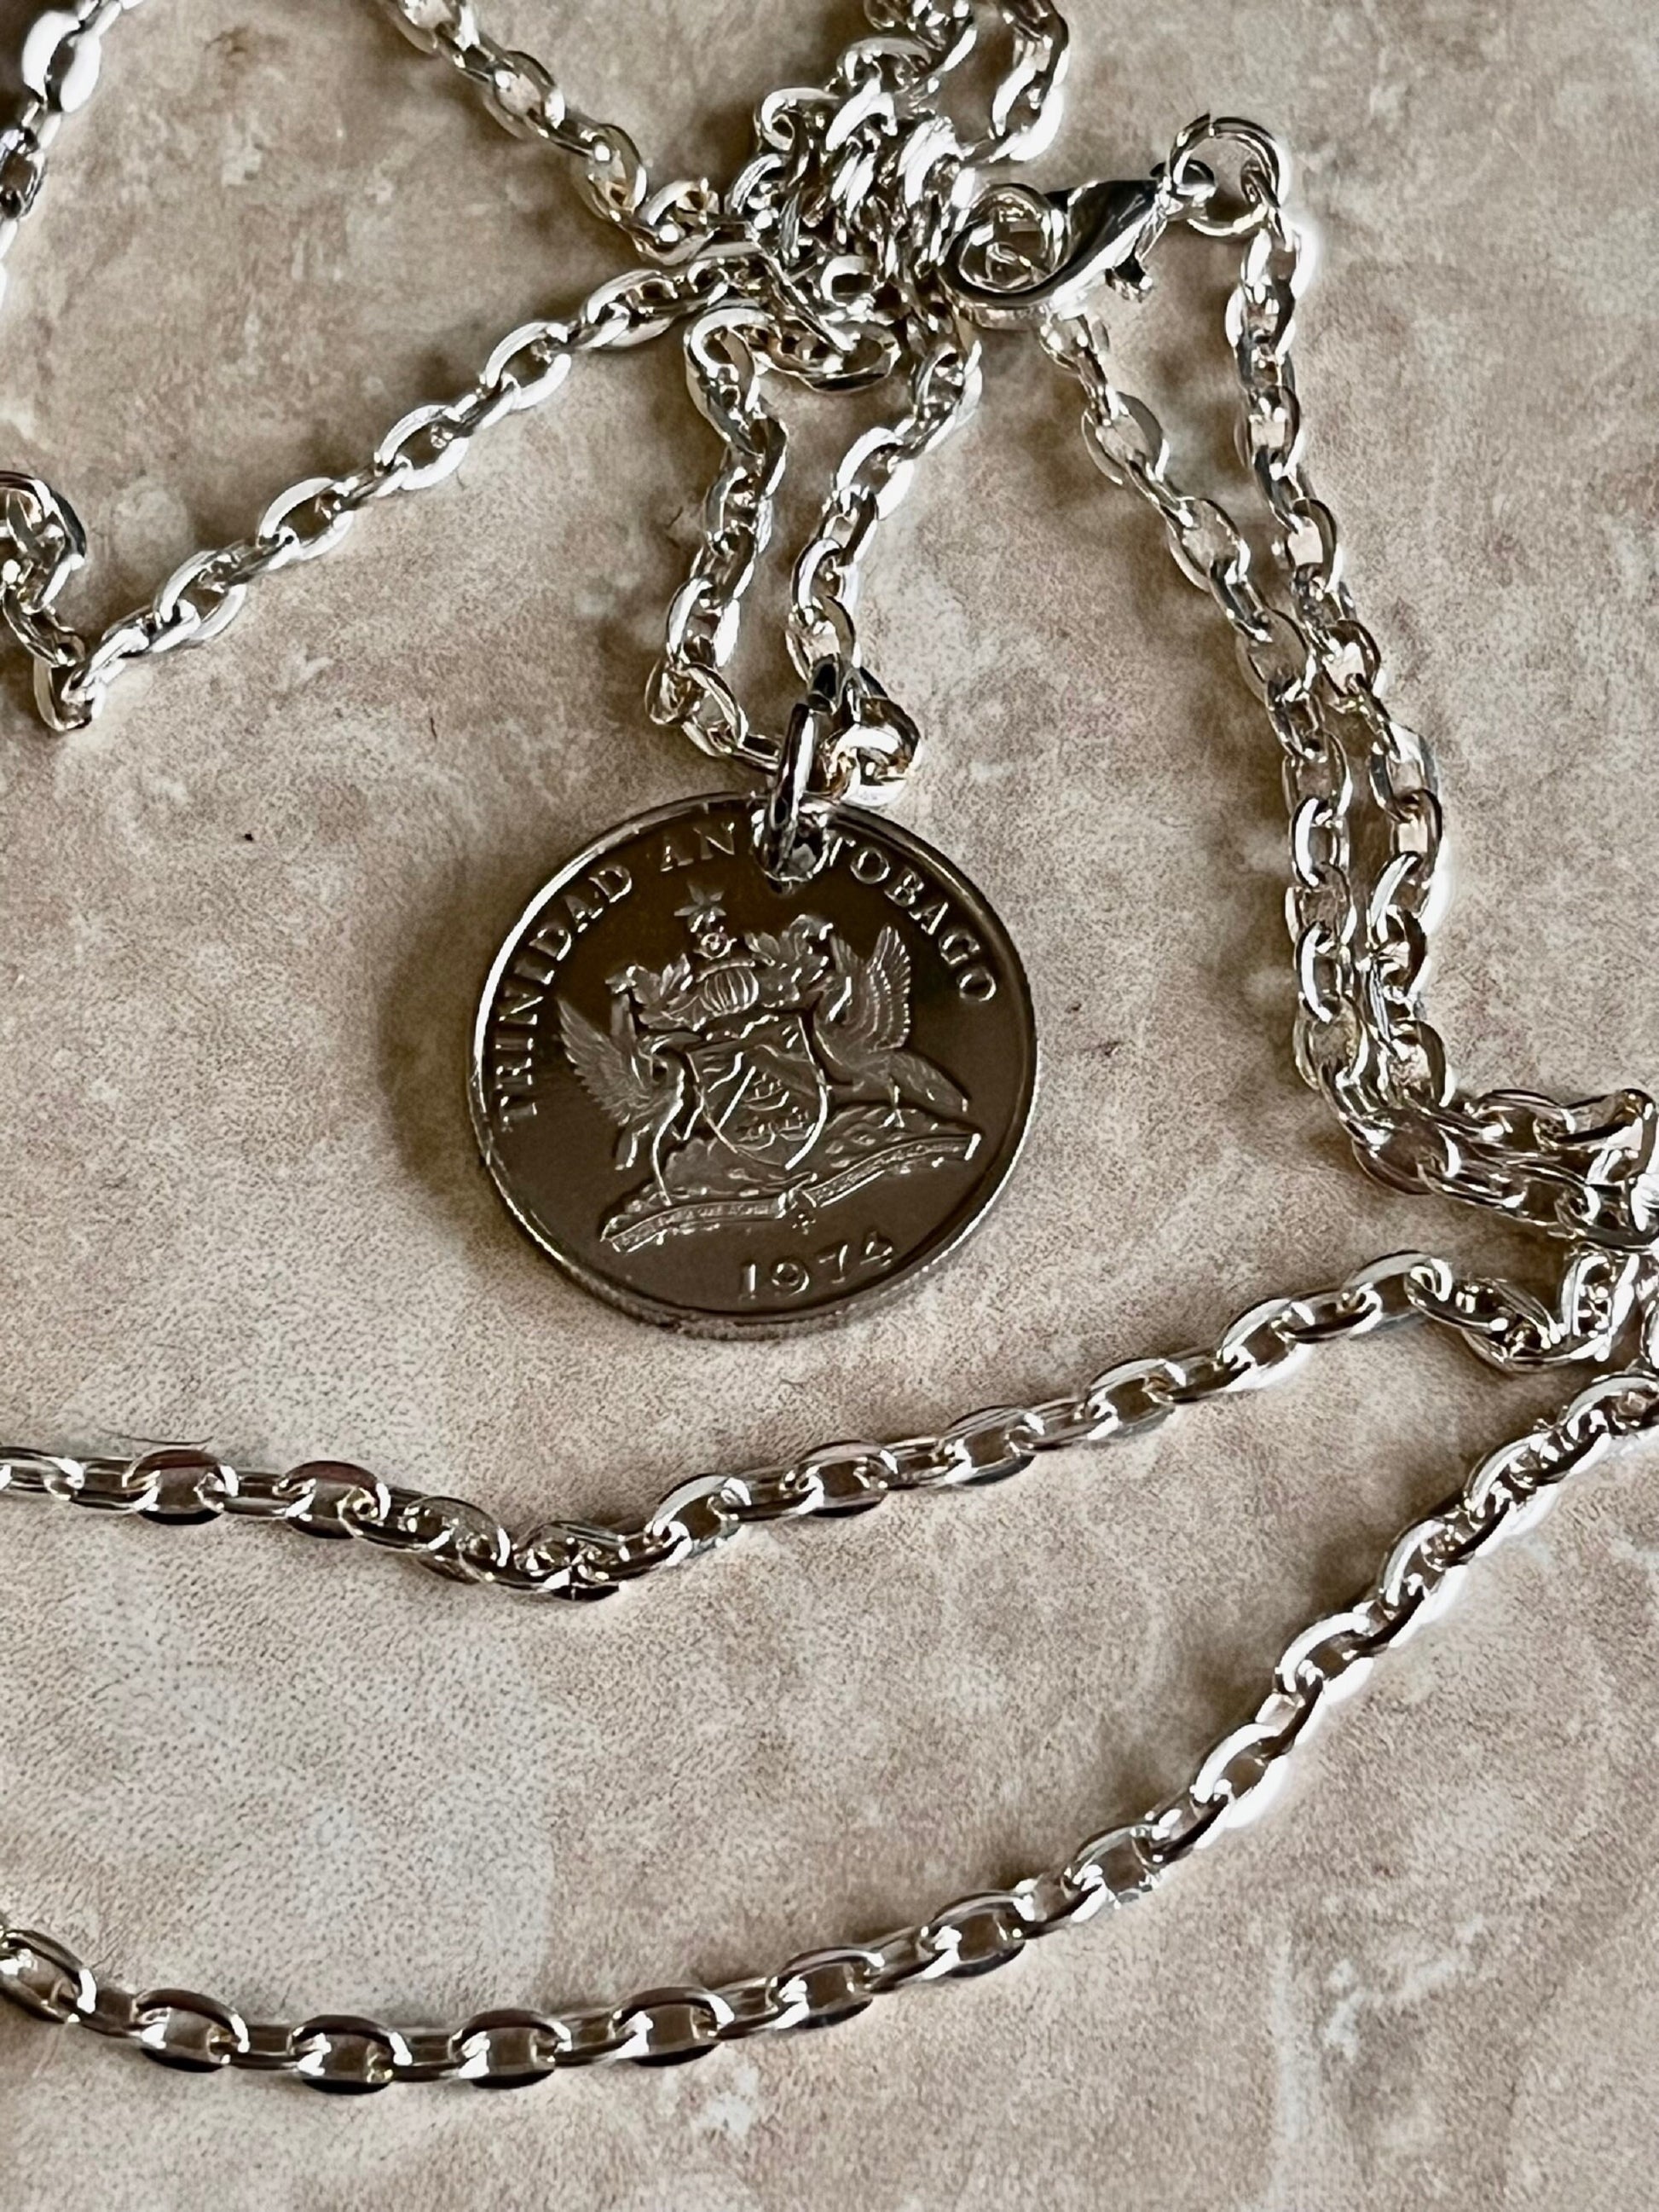 Trinidad and Tobago Mint Double Struck Coin Necklace 25 Cents Pendant Vintage Custom Made Coins Coin Enthusiast Fashion Accessory Handmade